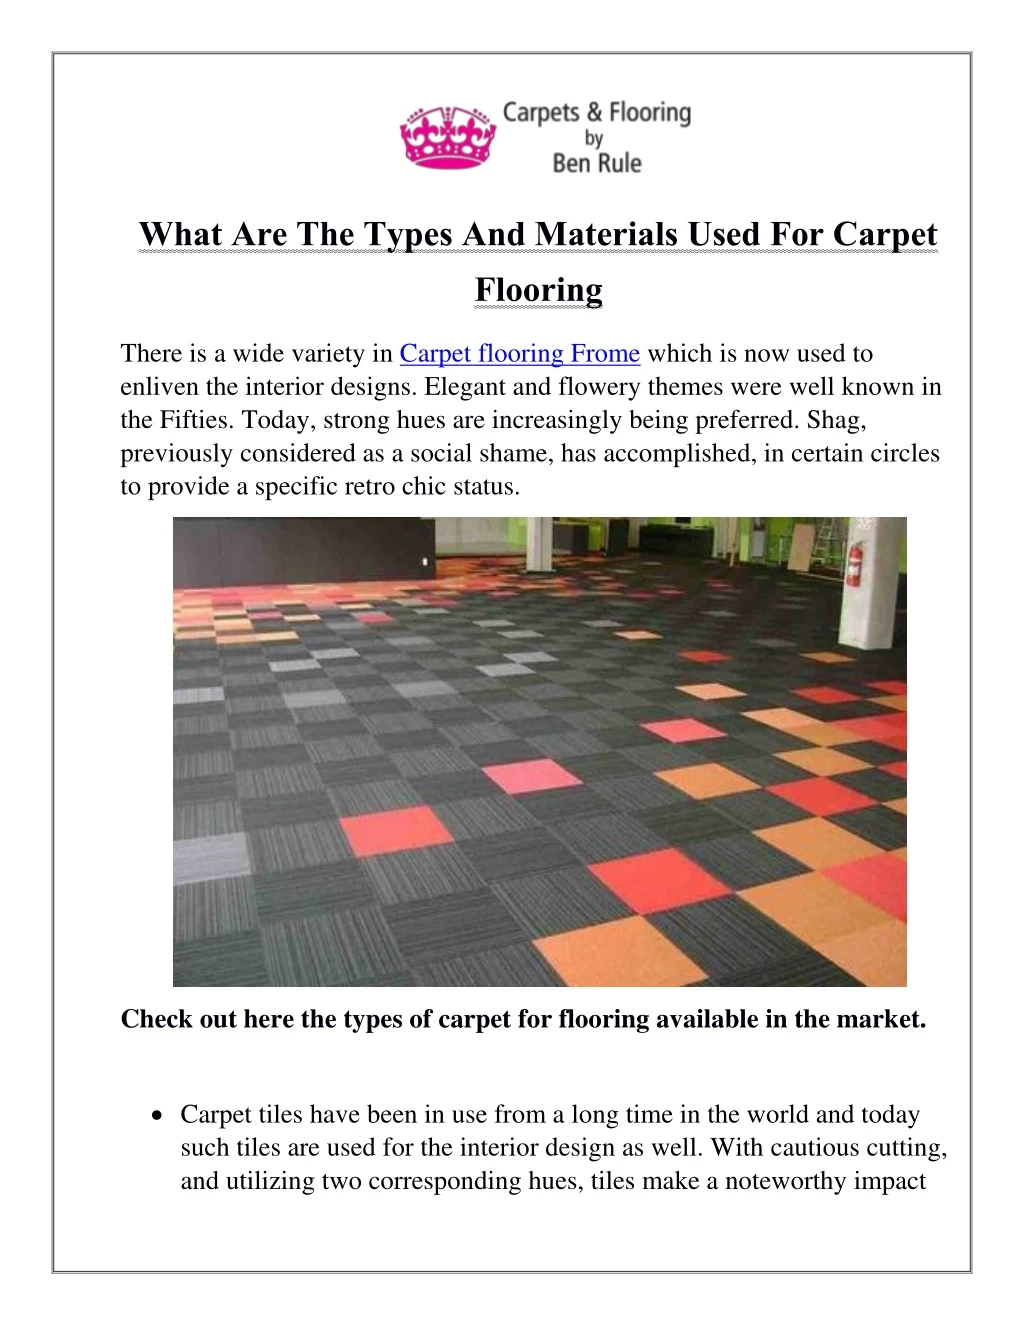 what are the types and materials used for carpet